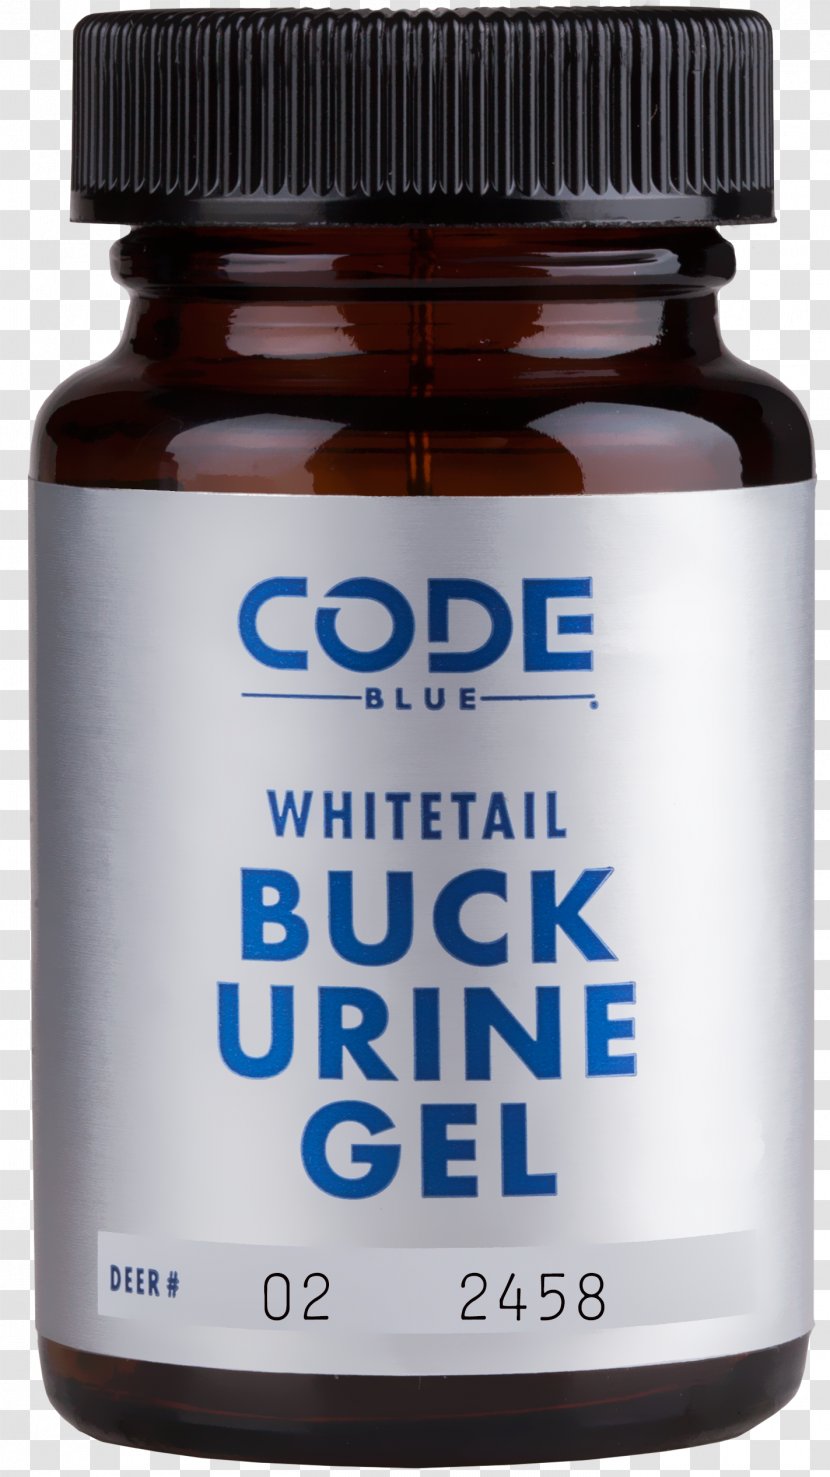 Code Blue Red Doe Urine Scent Whitetail CODE BLUE WHITETAIL TARSAL GLAND GEL Product Ounce - Gel - Cutlery Transparent PNG